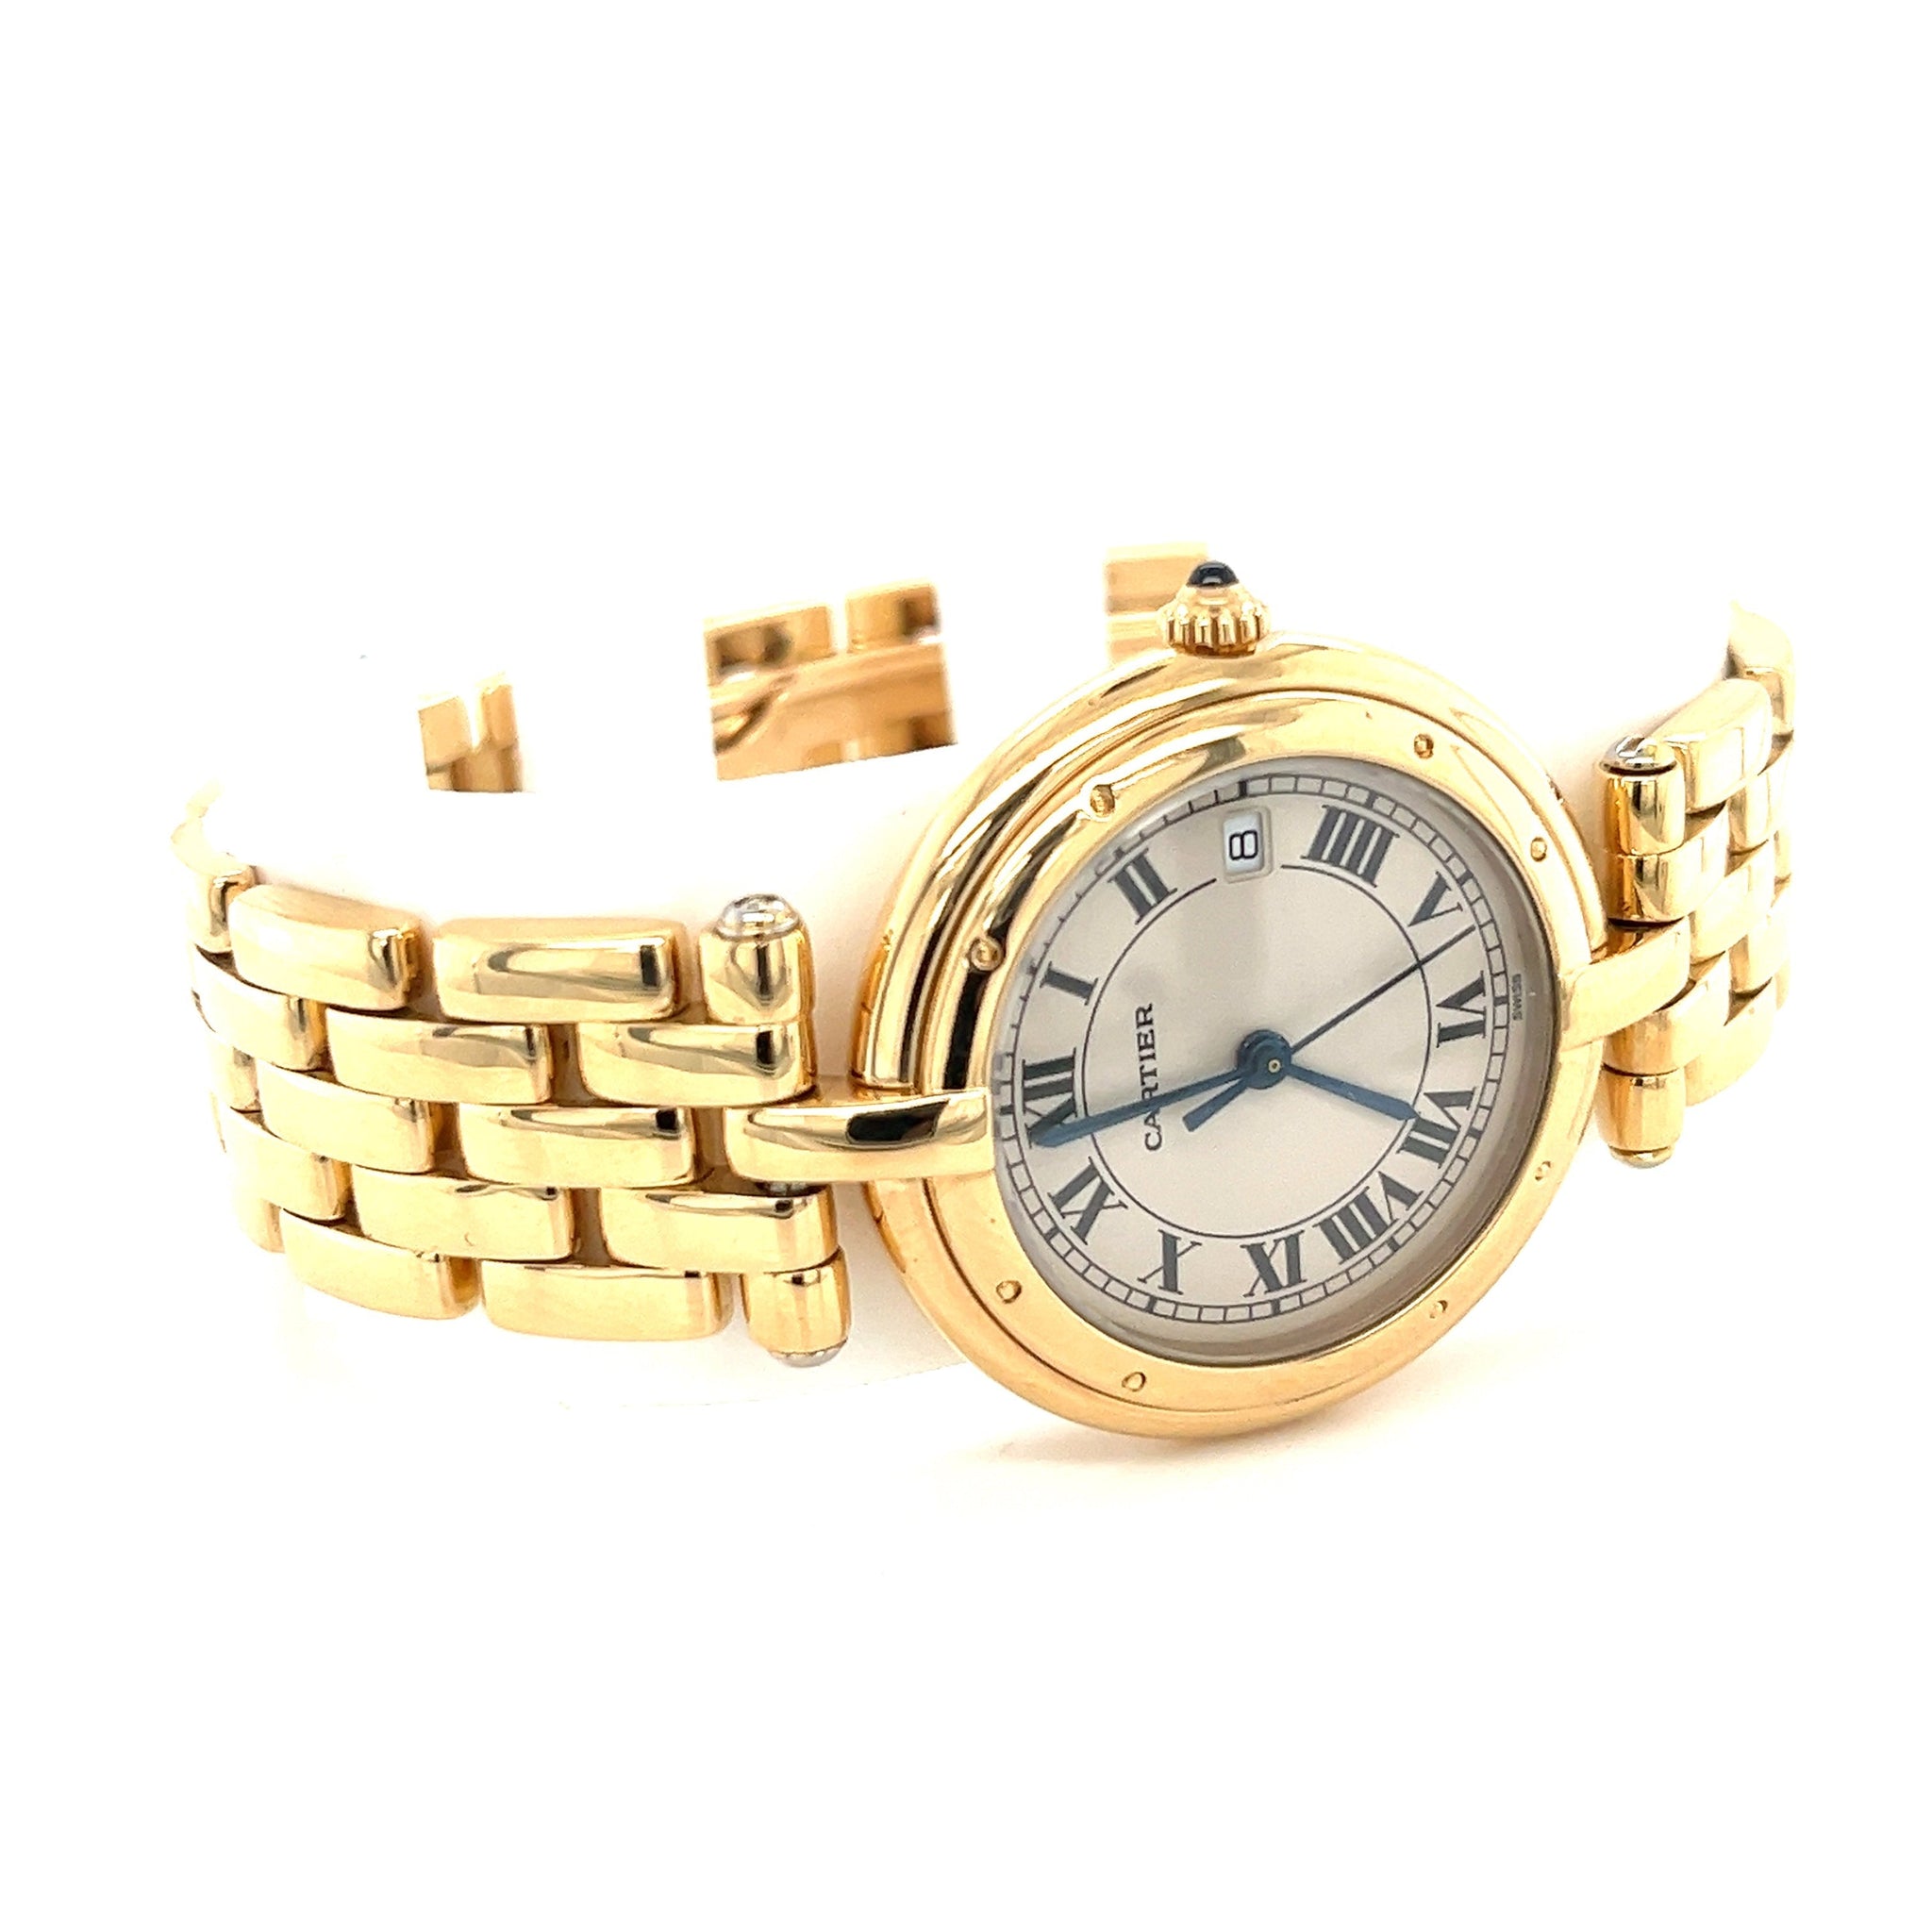 Cartier Panthere Vendome 30mm Ladies Quartz in 18K Gold Watch Ref. 883964-Watches-ASSAY